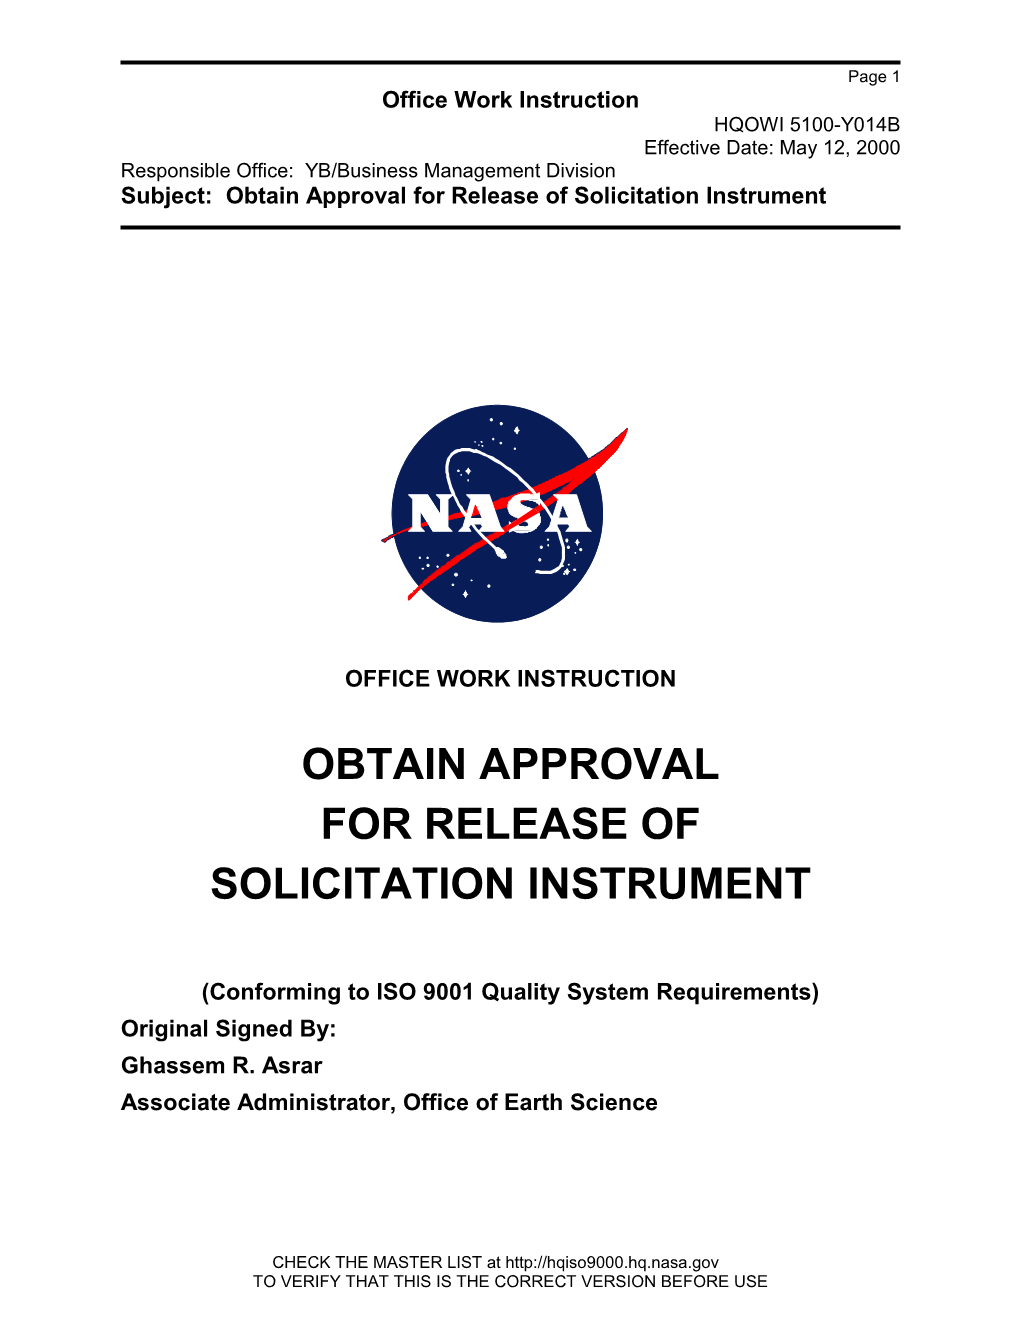 Obtain Approval for Release of Solicitation Instrument